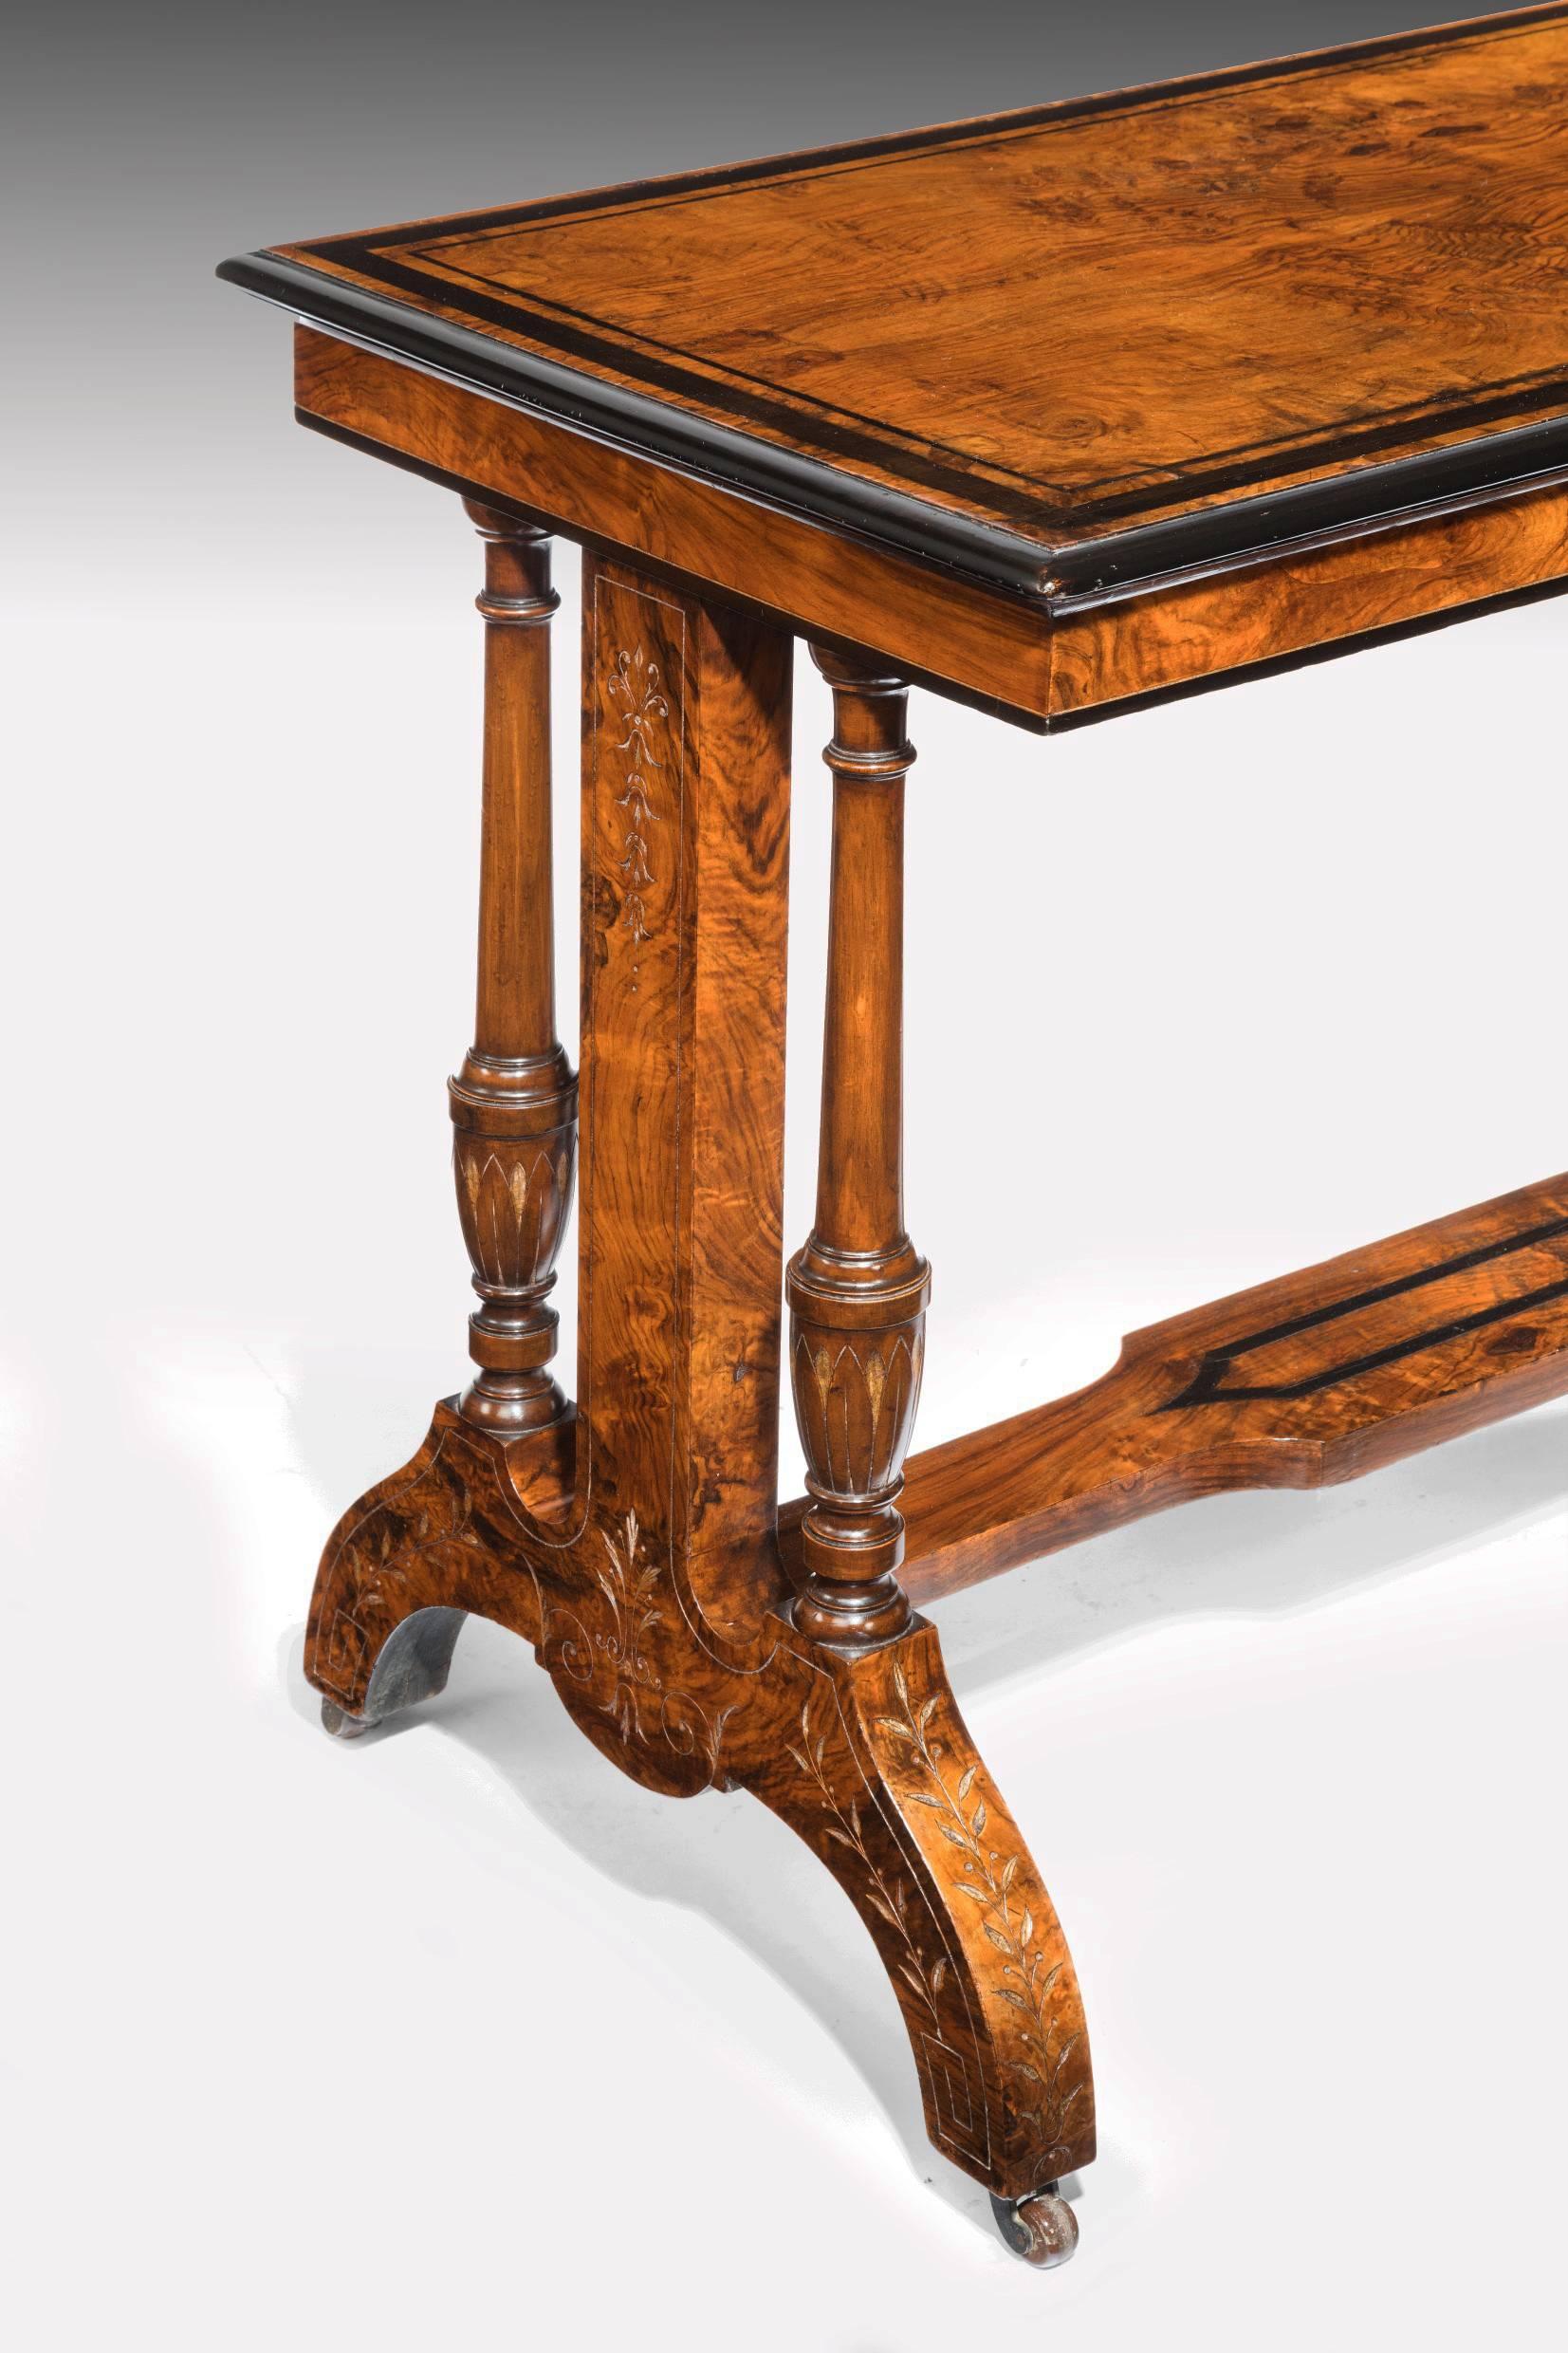 Quality Antique Walnut and Ebony Inlaid Table In Excellent Condition In Benington, Herts